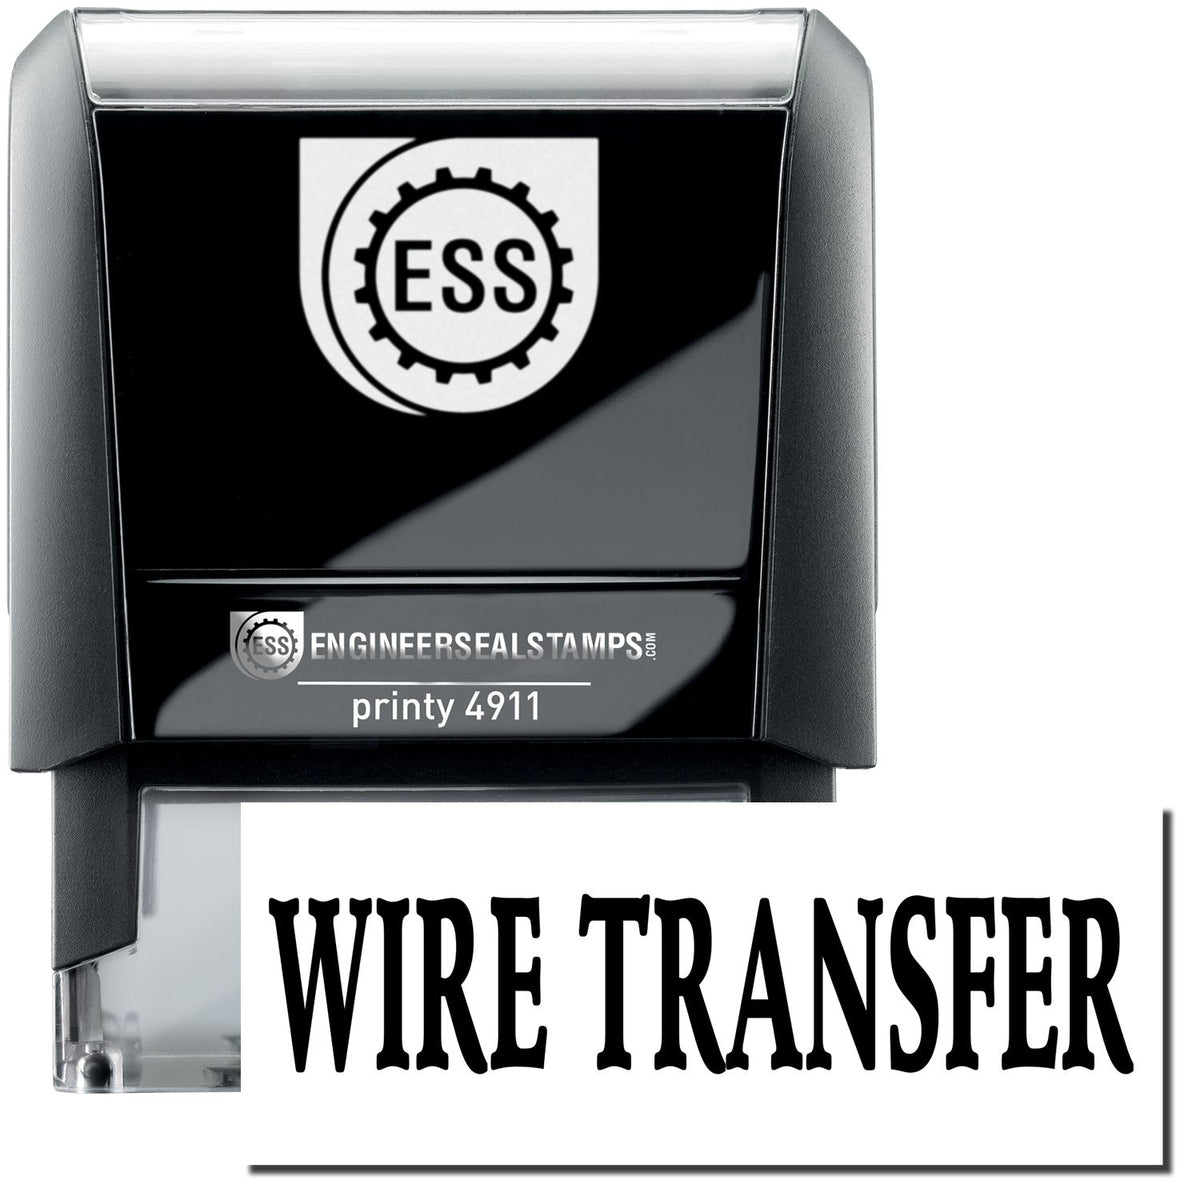 A self-inking stamp with a stamped image showing how the text &quot;WIRE TRANSFER&quot; is displayed after stamping.